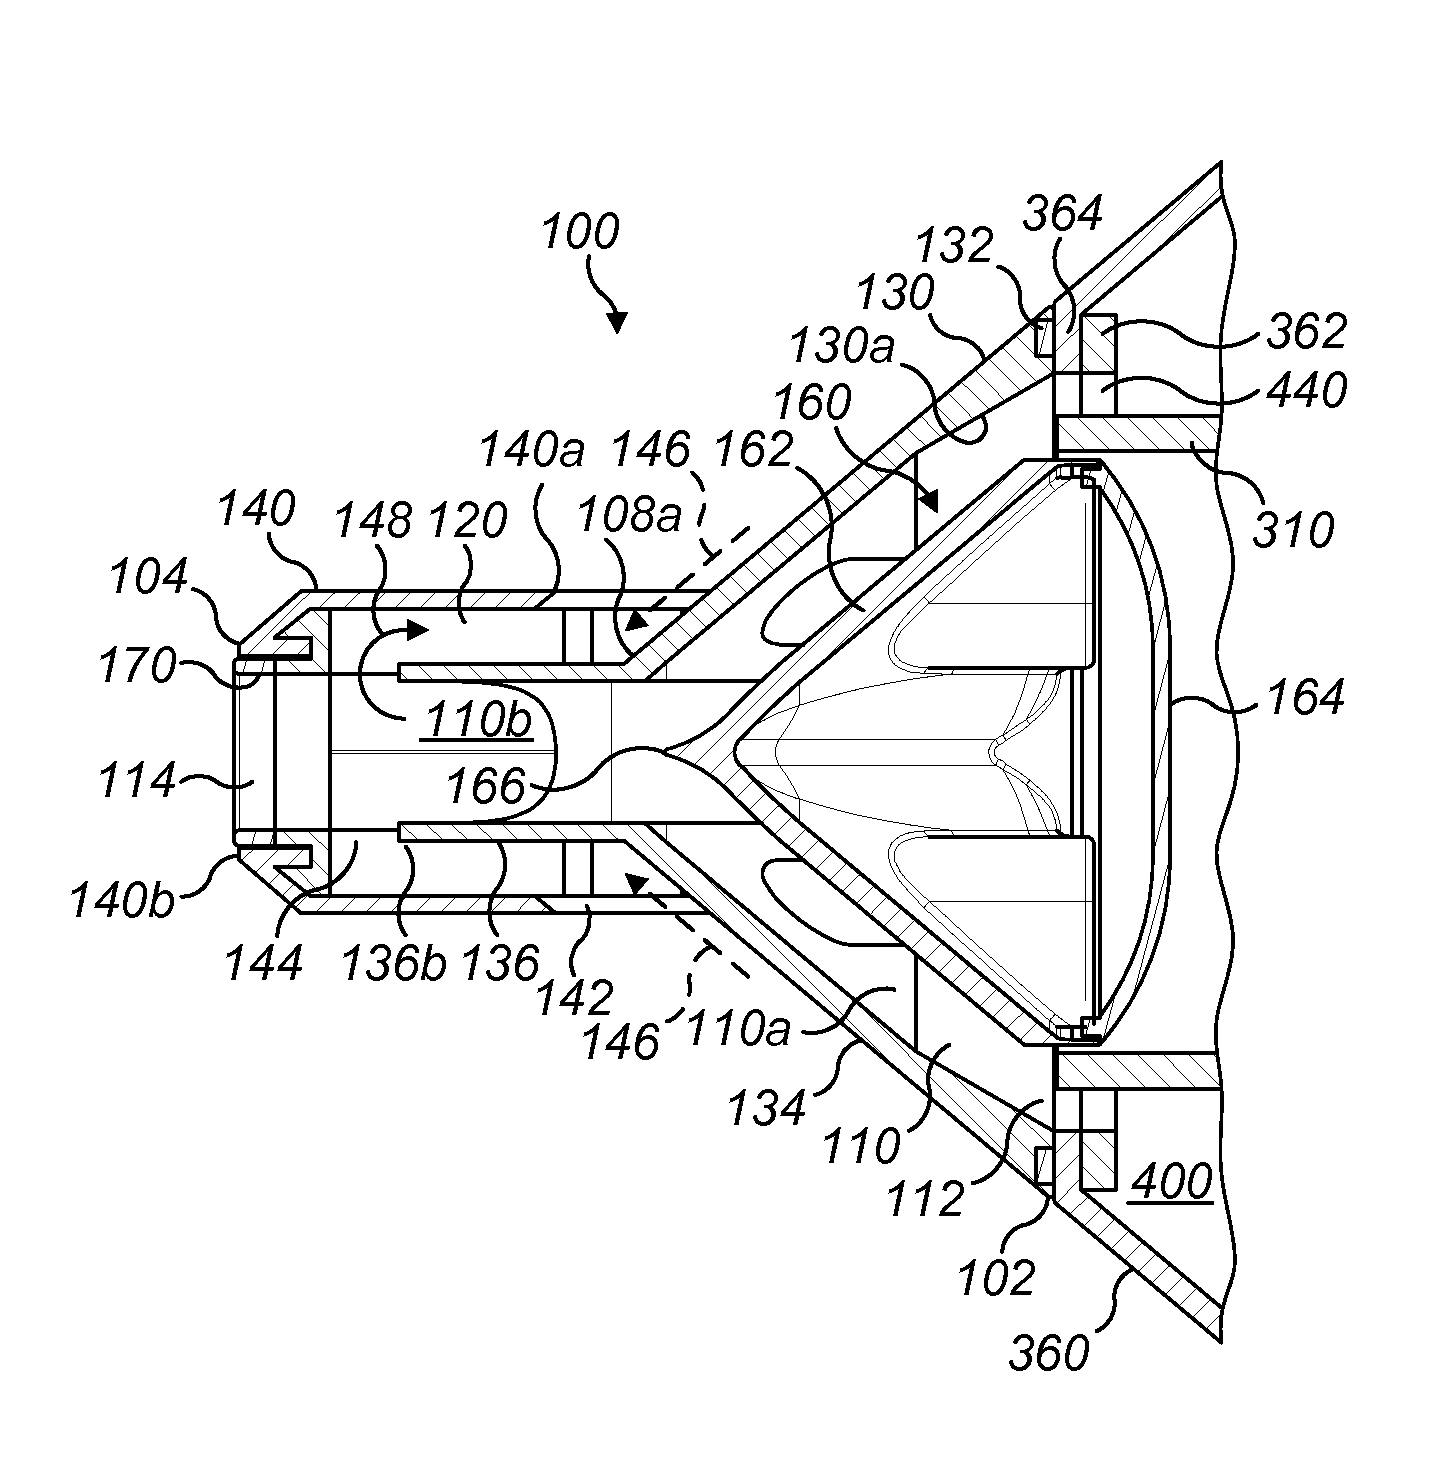 Attachment for a handheld appliance